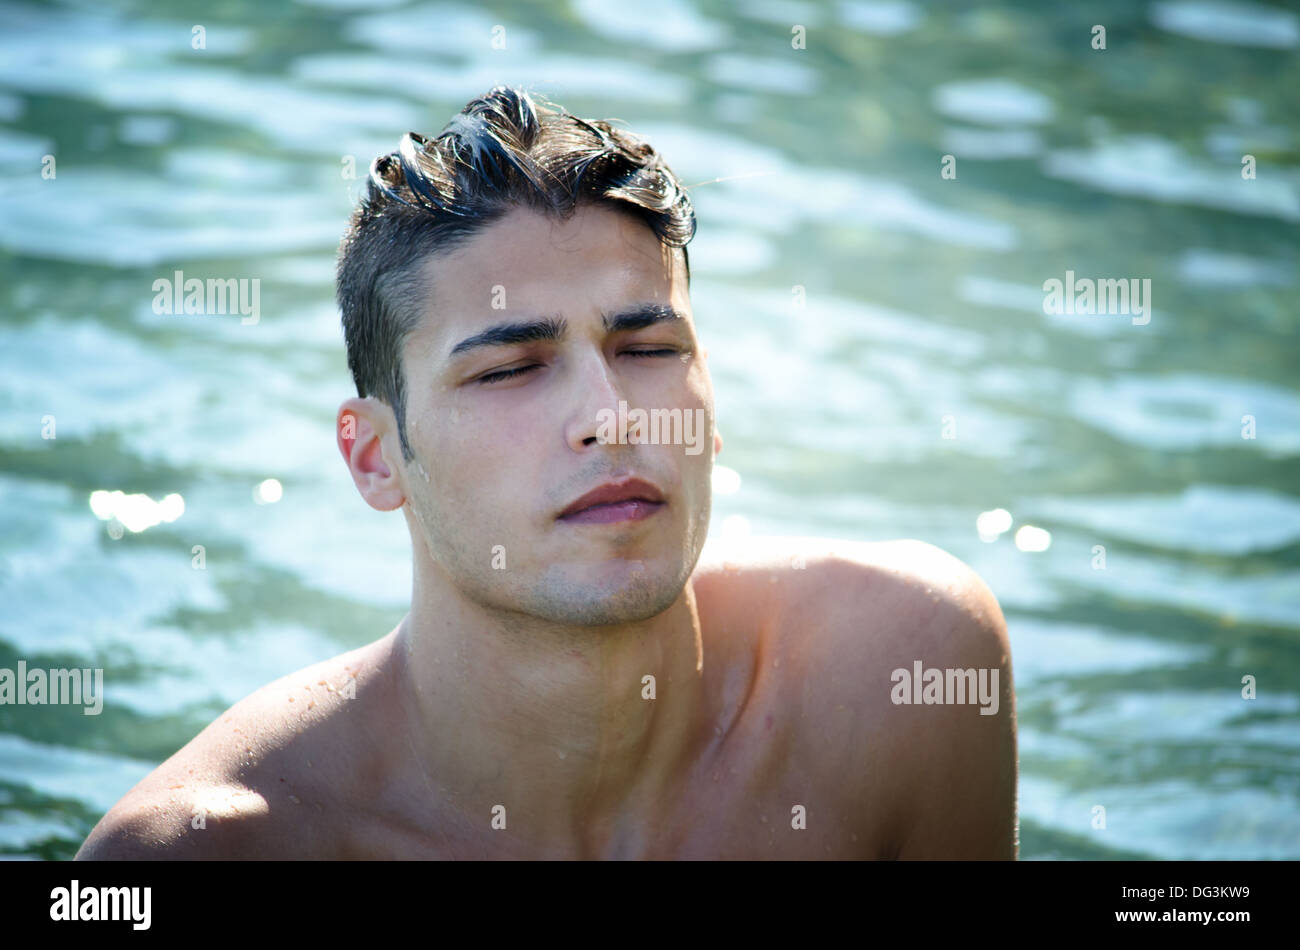 Handsome young man coming out of water with wet hair, eyes closed. Stock Photo